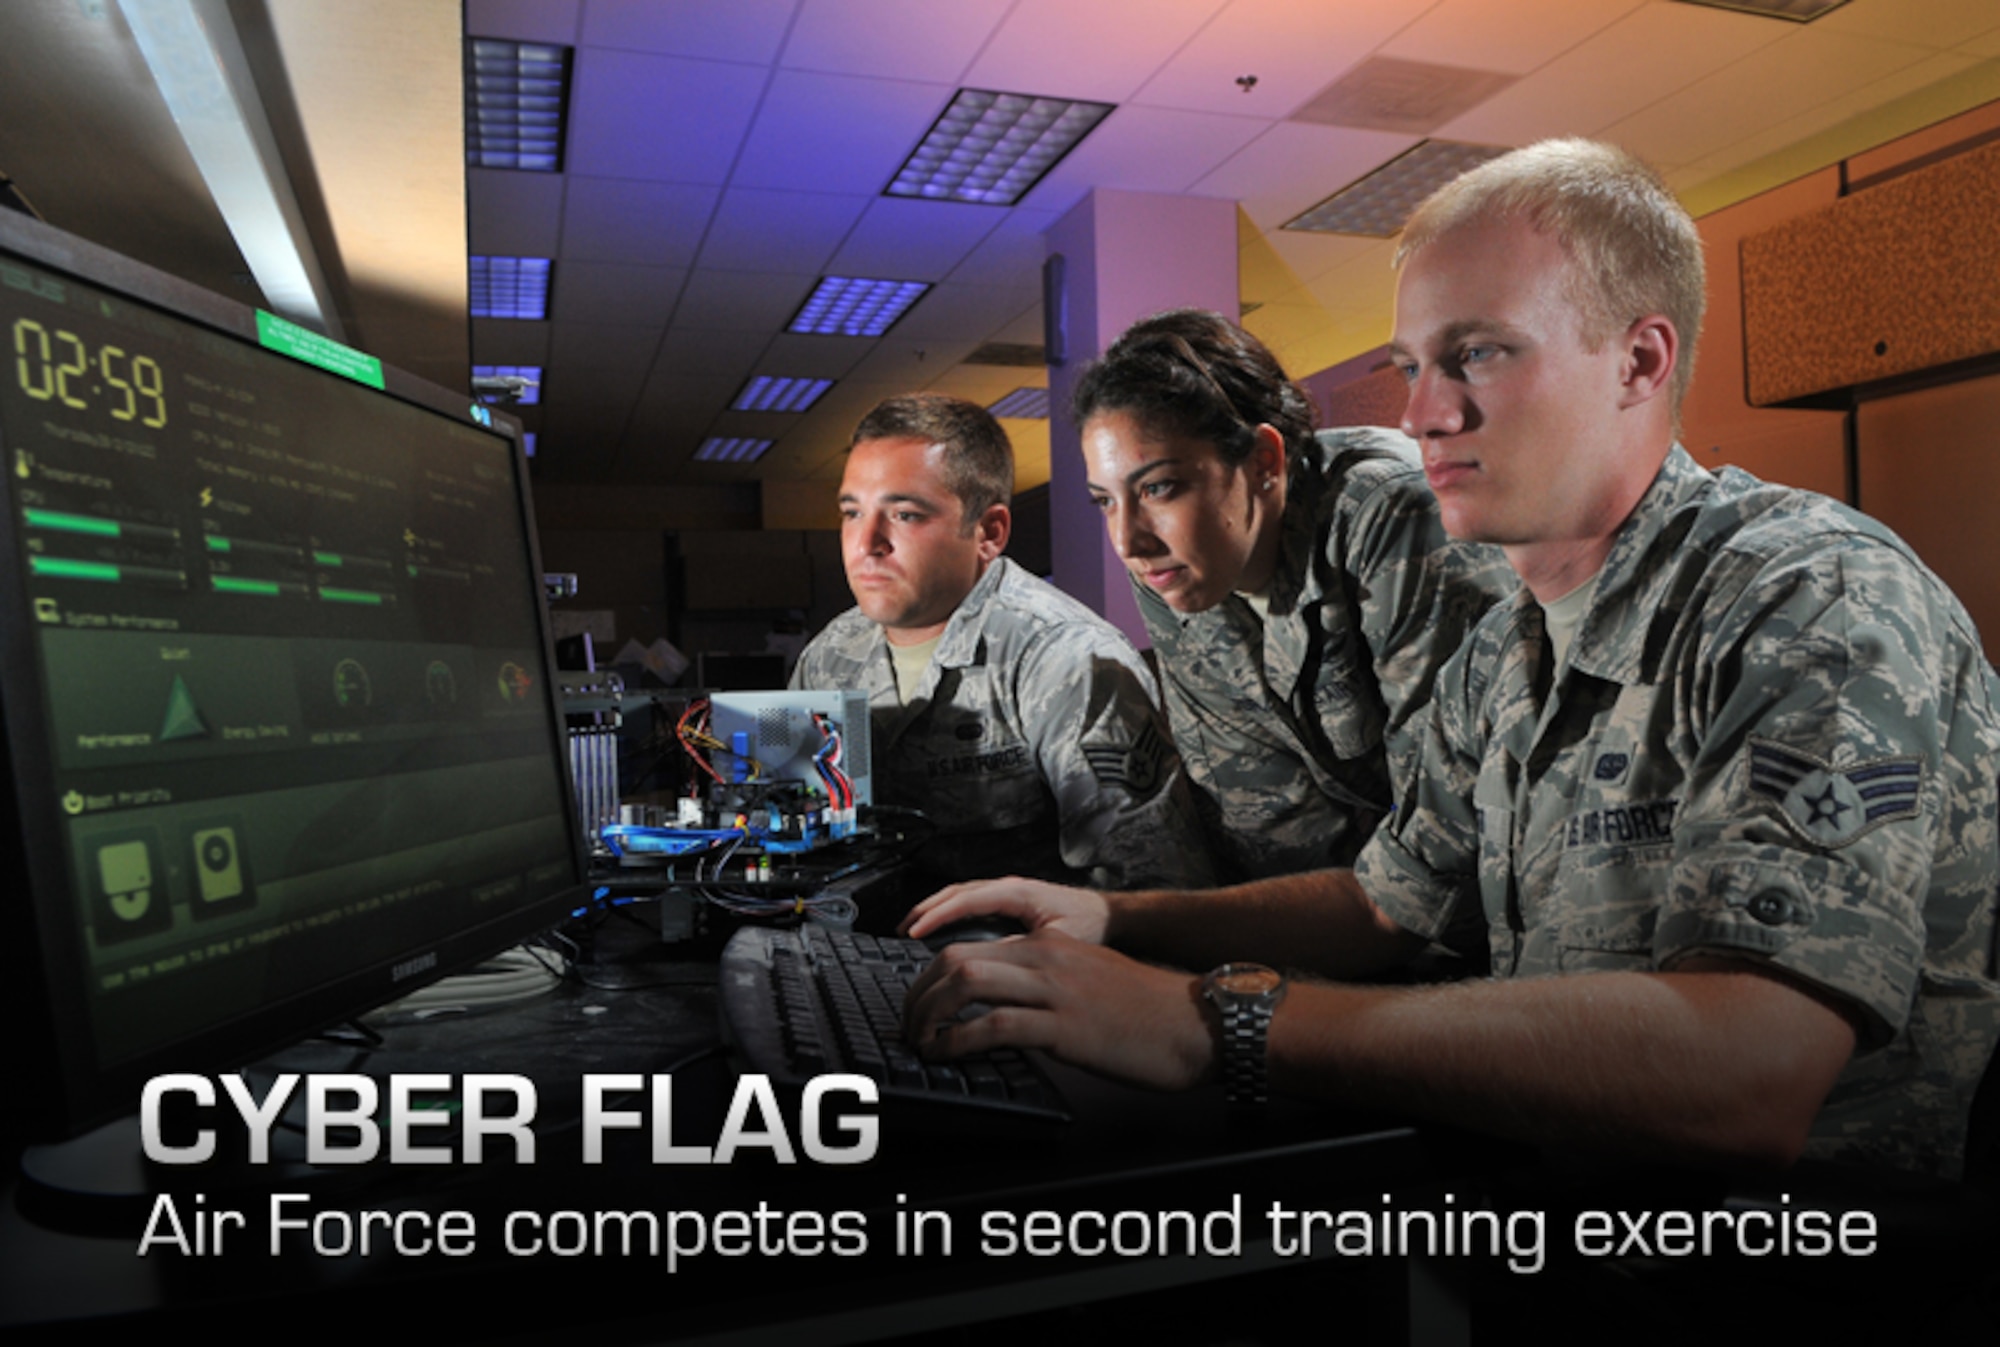 2nd Lt. Stephanie Stanford, 90th Information Operations Squadron cyber development lead, Staff Sgt. Aaron Wendel, 90th IOS cyber network technician, and Senior Airman Brett Tucker, 90th IOS cyber systems operator, perform cyber operations Aug. 1 at Lackland Air Force Base, Texas. (U.S. Air Force photo by Boyd Belcher)
